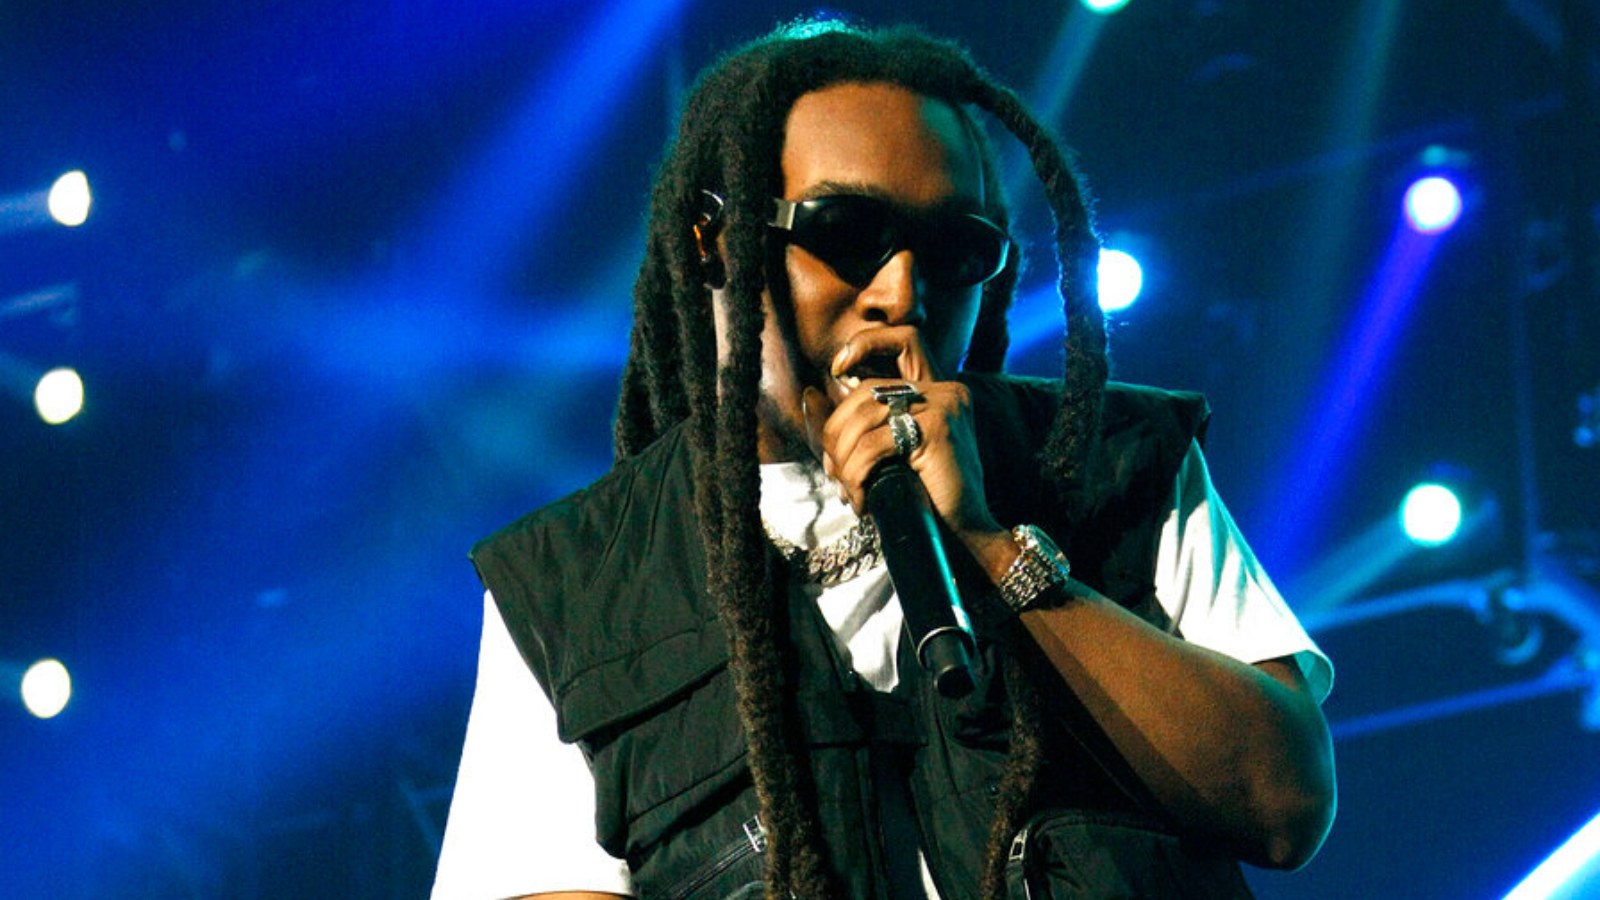 TakeOff, a Black man with thick dreaded braids, wearing sunglasses and a dark vest over a white shirt, raps into a microphone on stage.